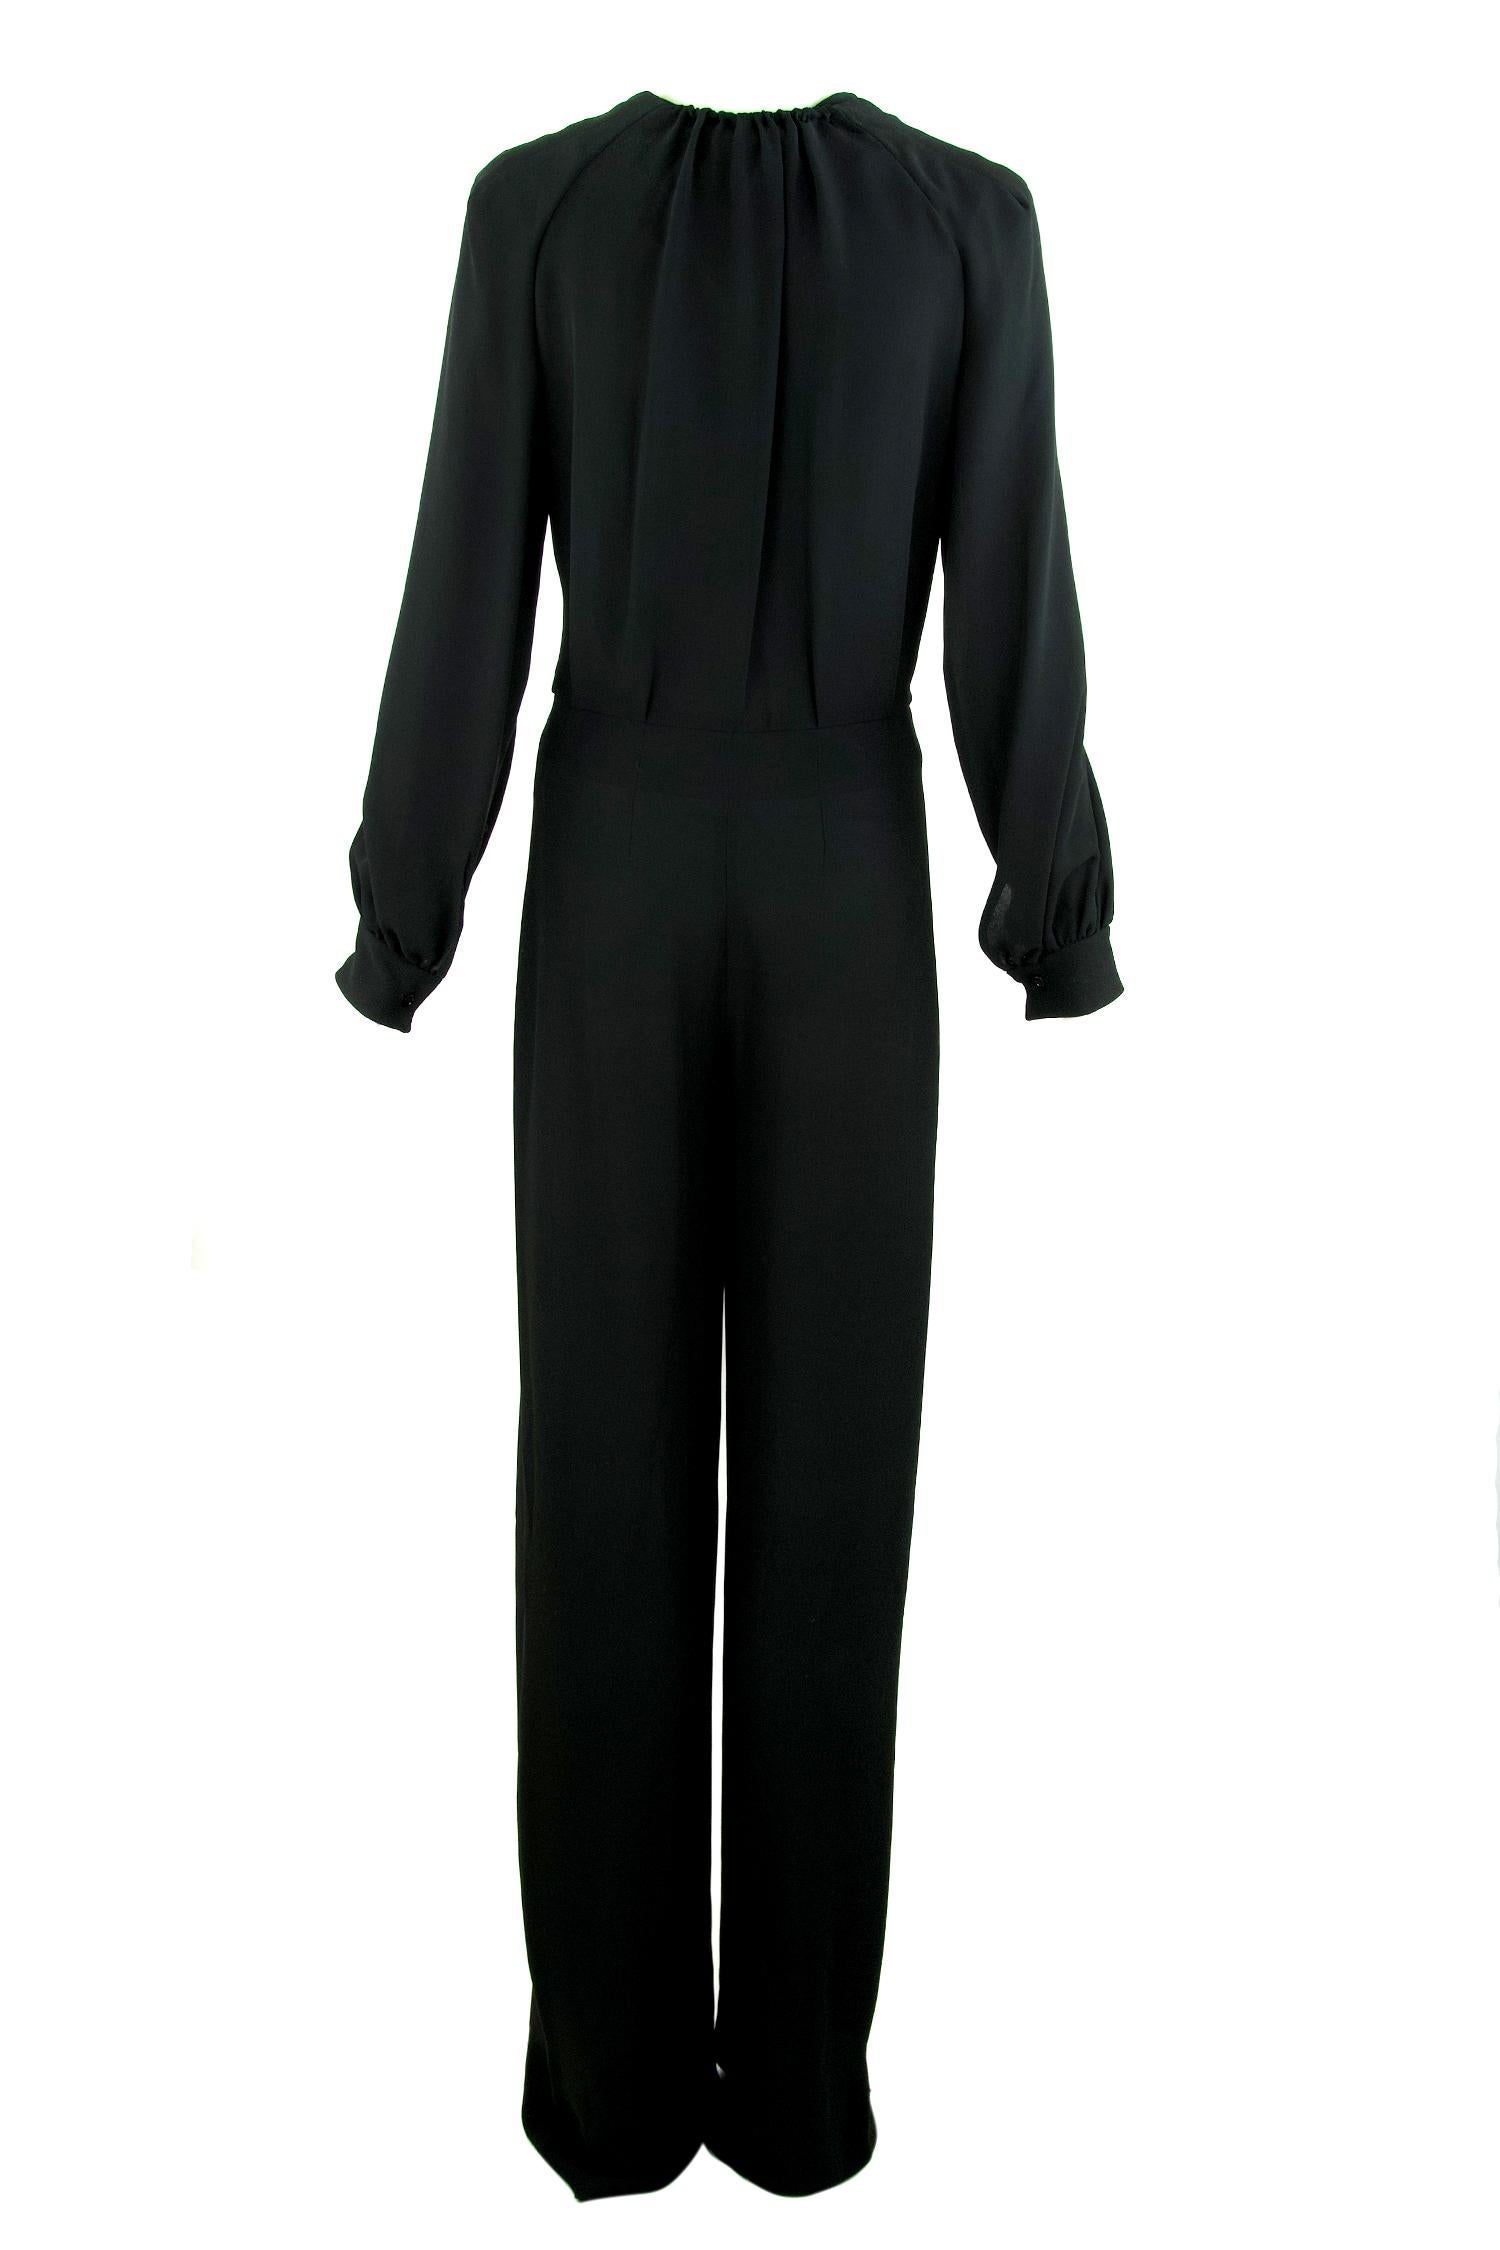 Chloe Black Low V-Neck Jumpsuit - Size FR  40 In Excellent Condition For Sale In Newport, RI